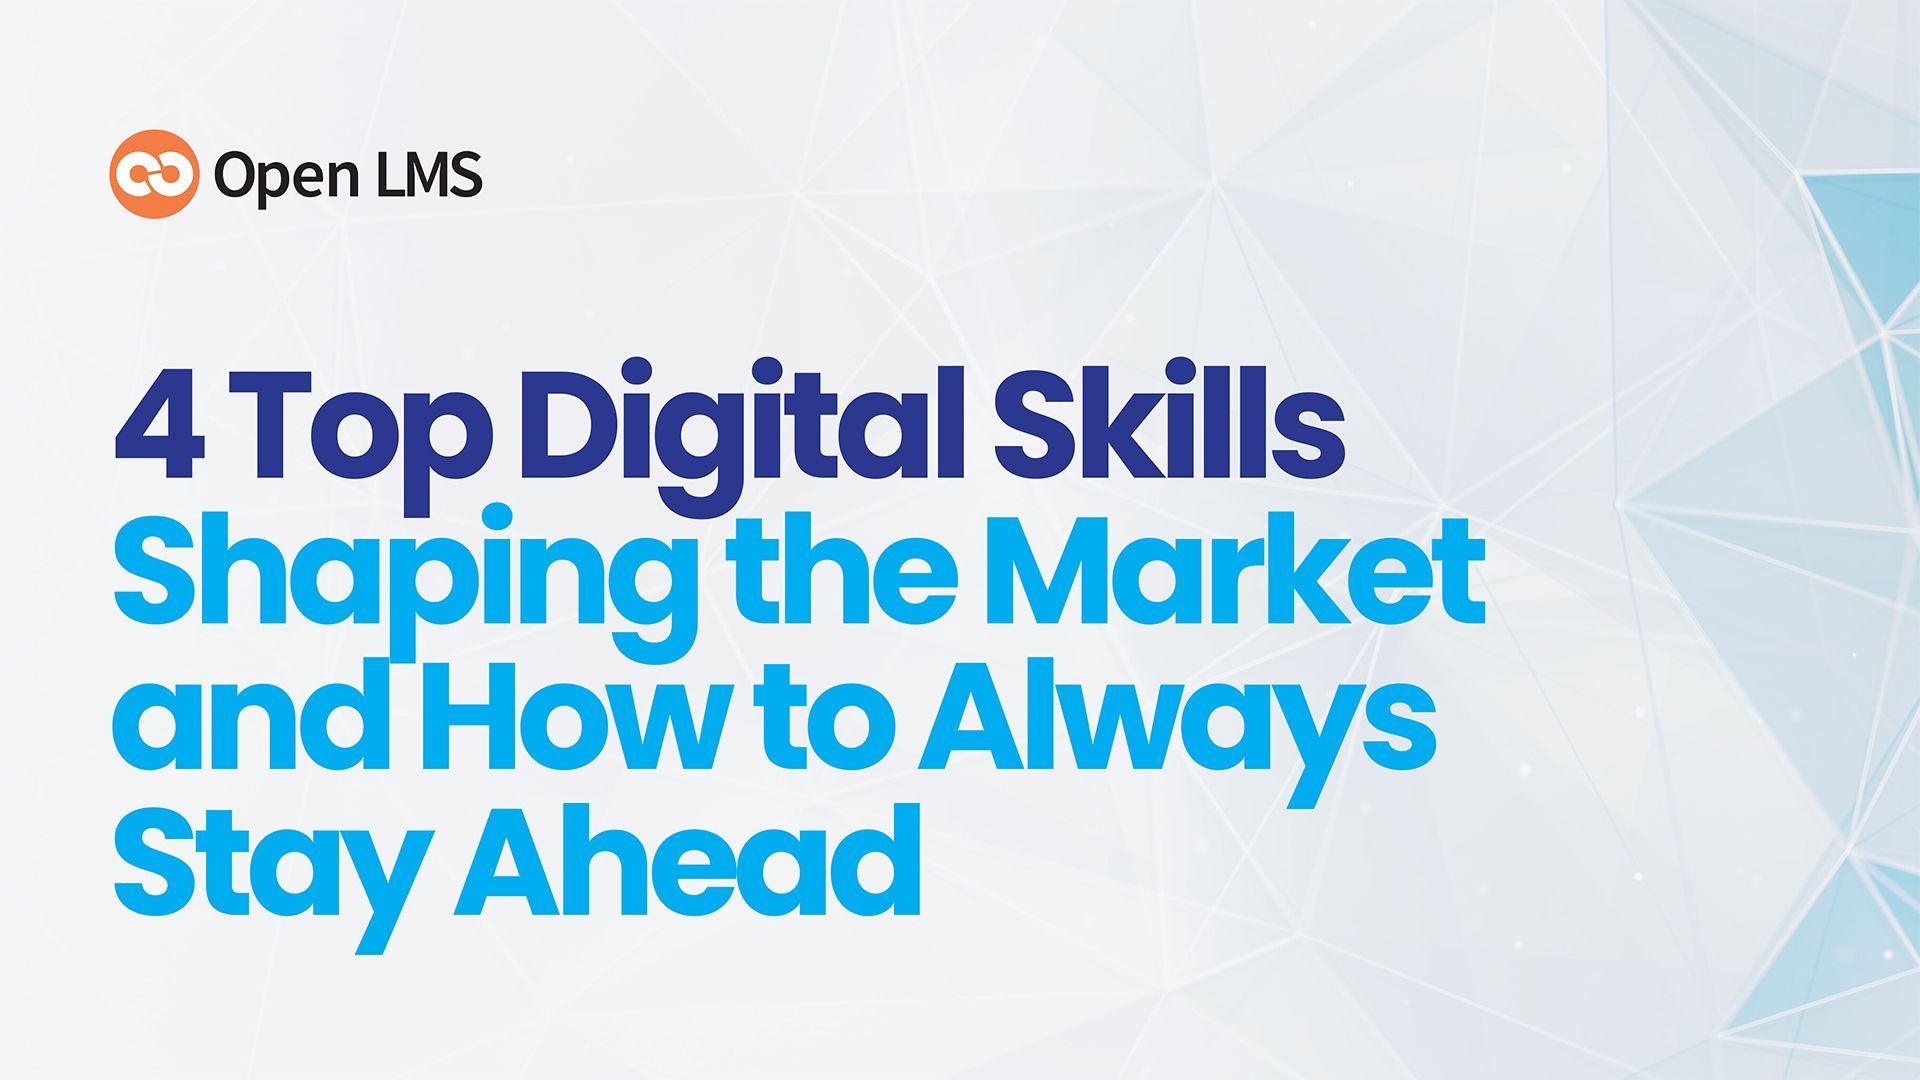 4 Top Digital Skills Shaping the Market and How to Always Stay Ahead